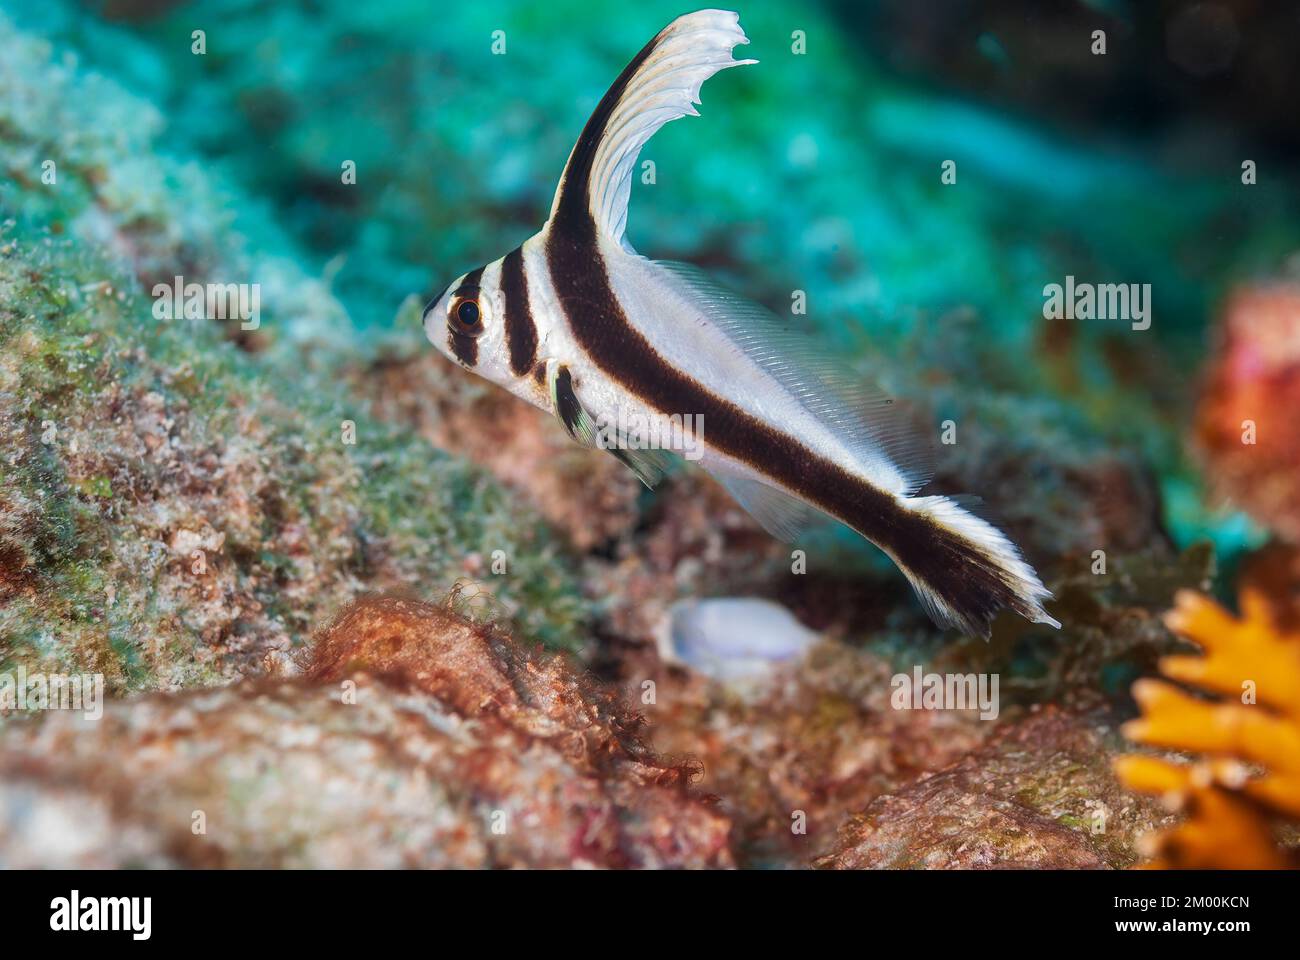 Underwater scene with a wild juvenile spotted drum while seen SCUBA diving Stock Photo